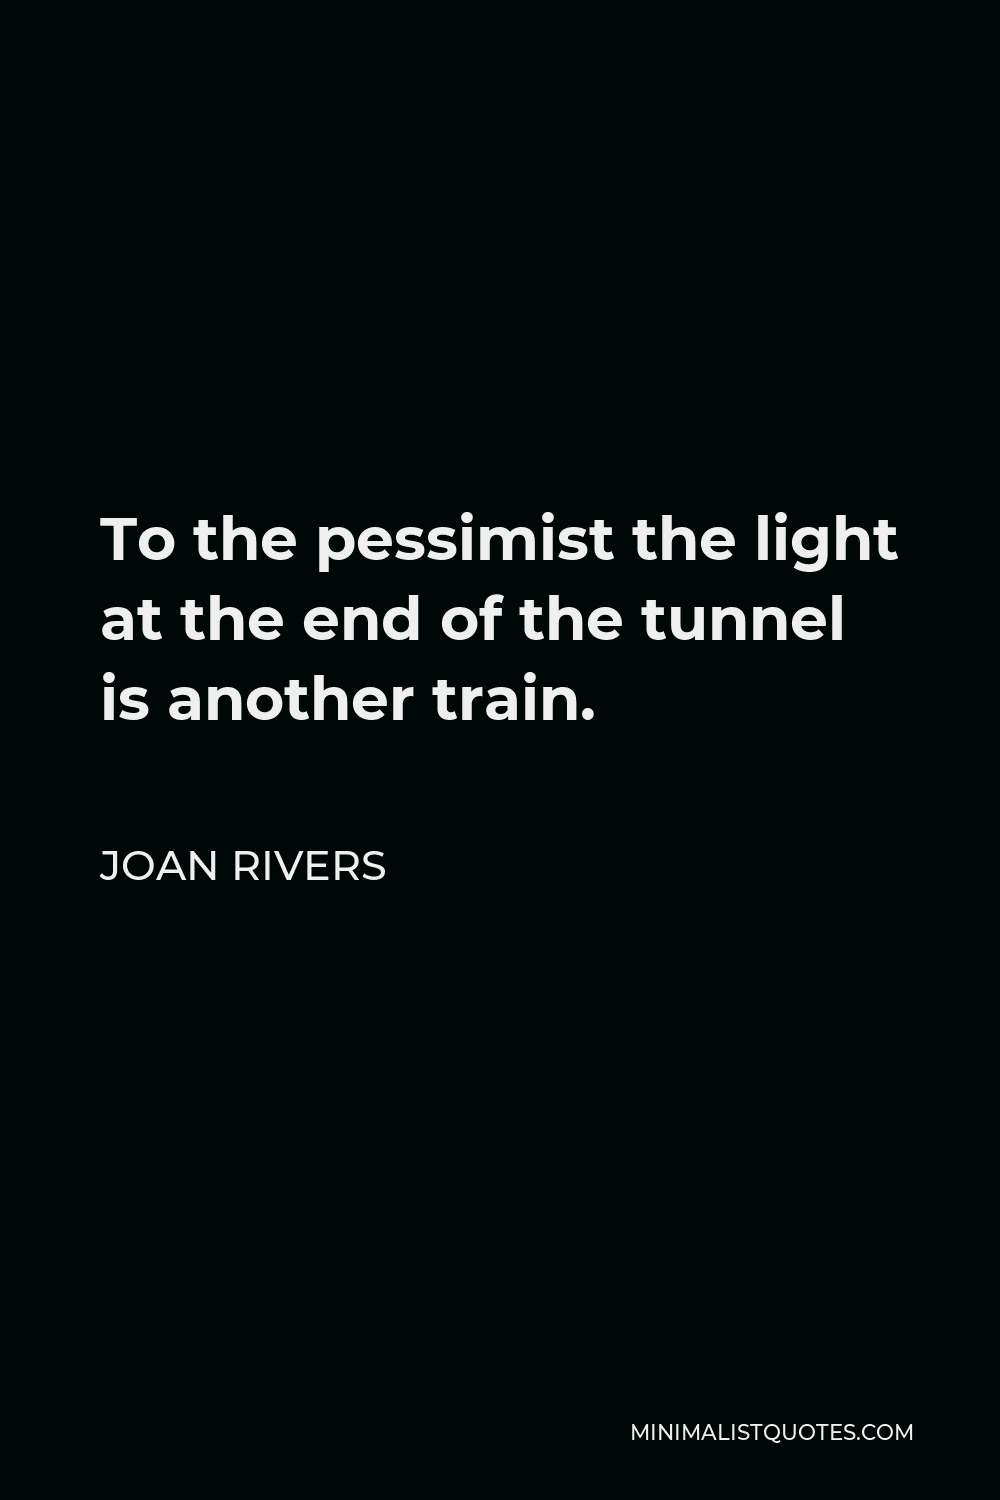 Joan Rivers Quote - To the pessimist the light at the end of the tunnel is another train.